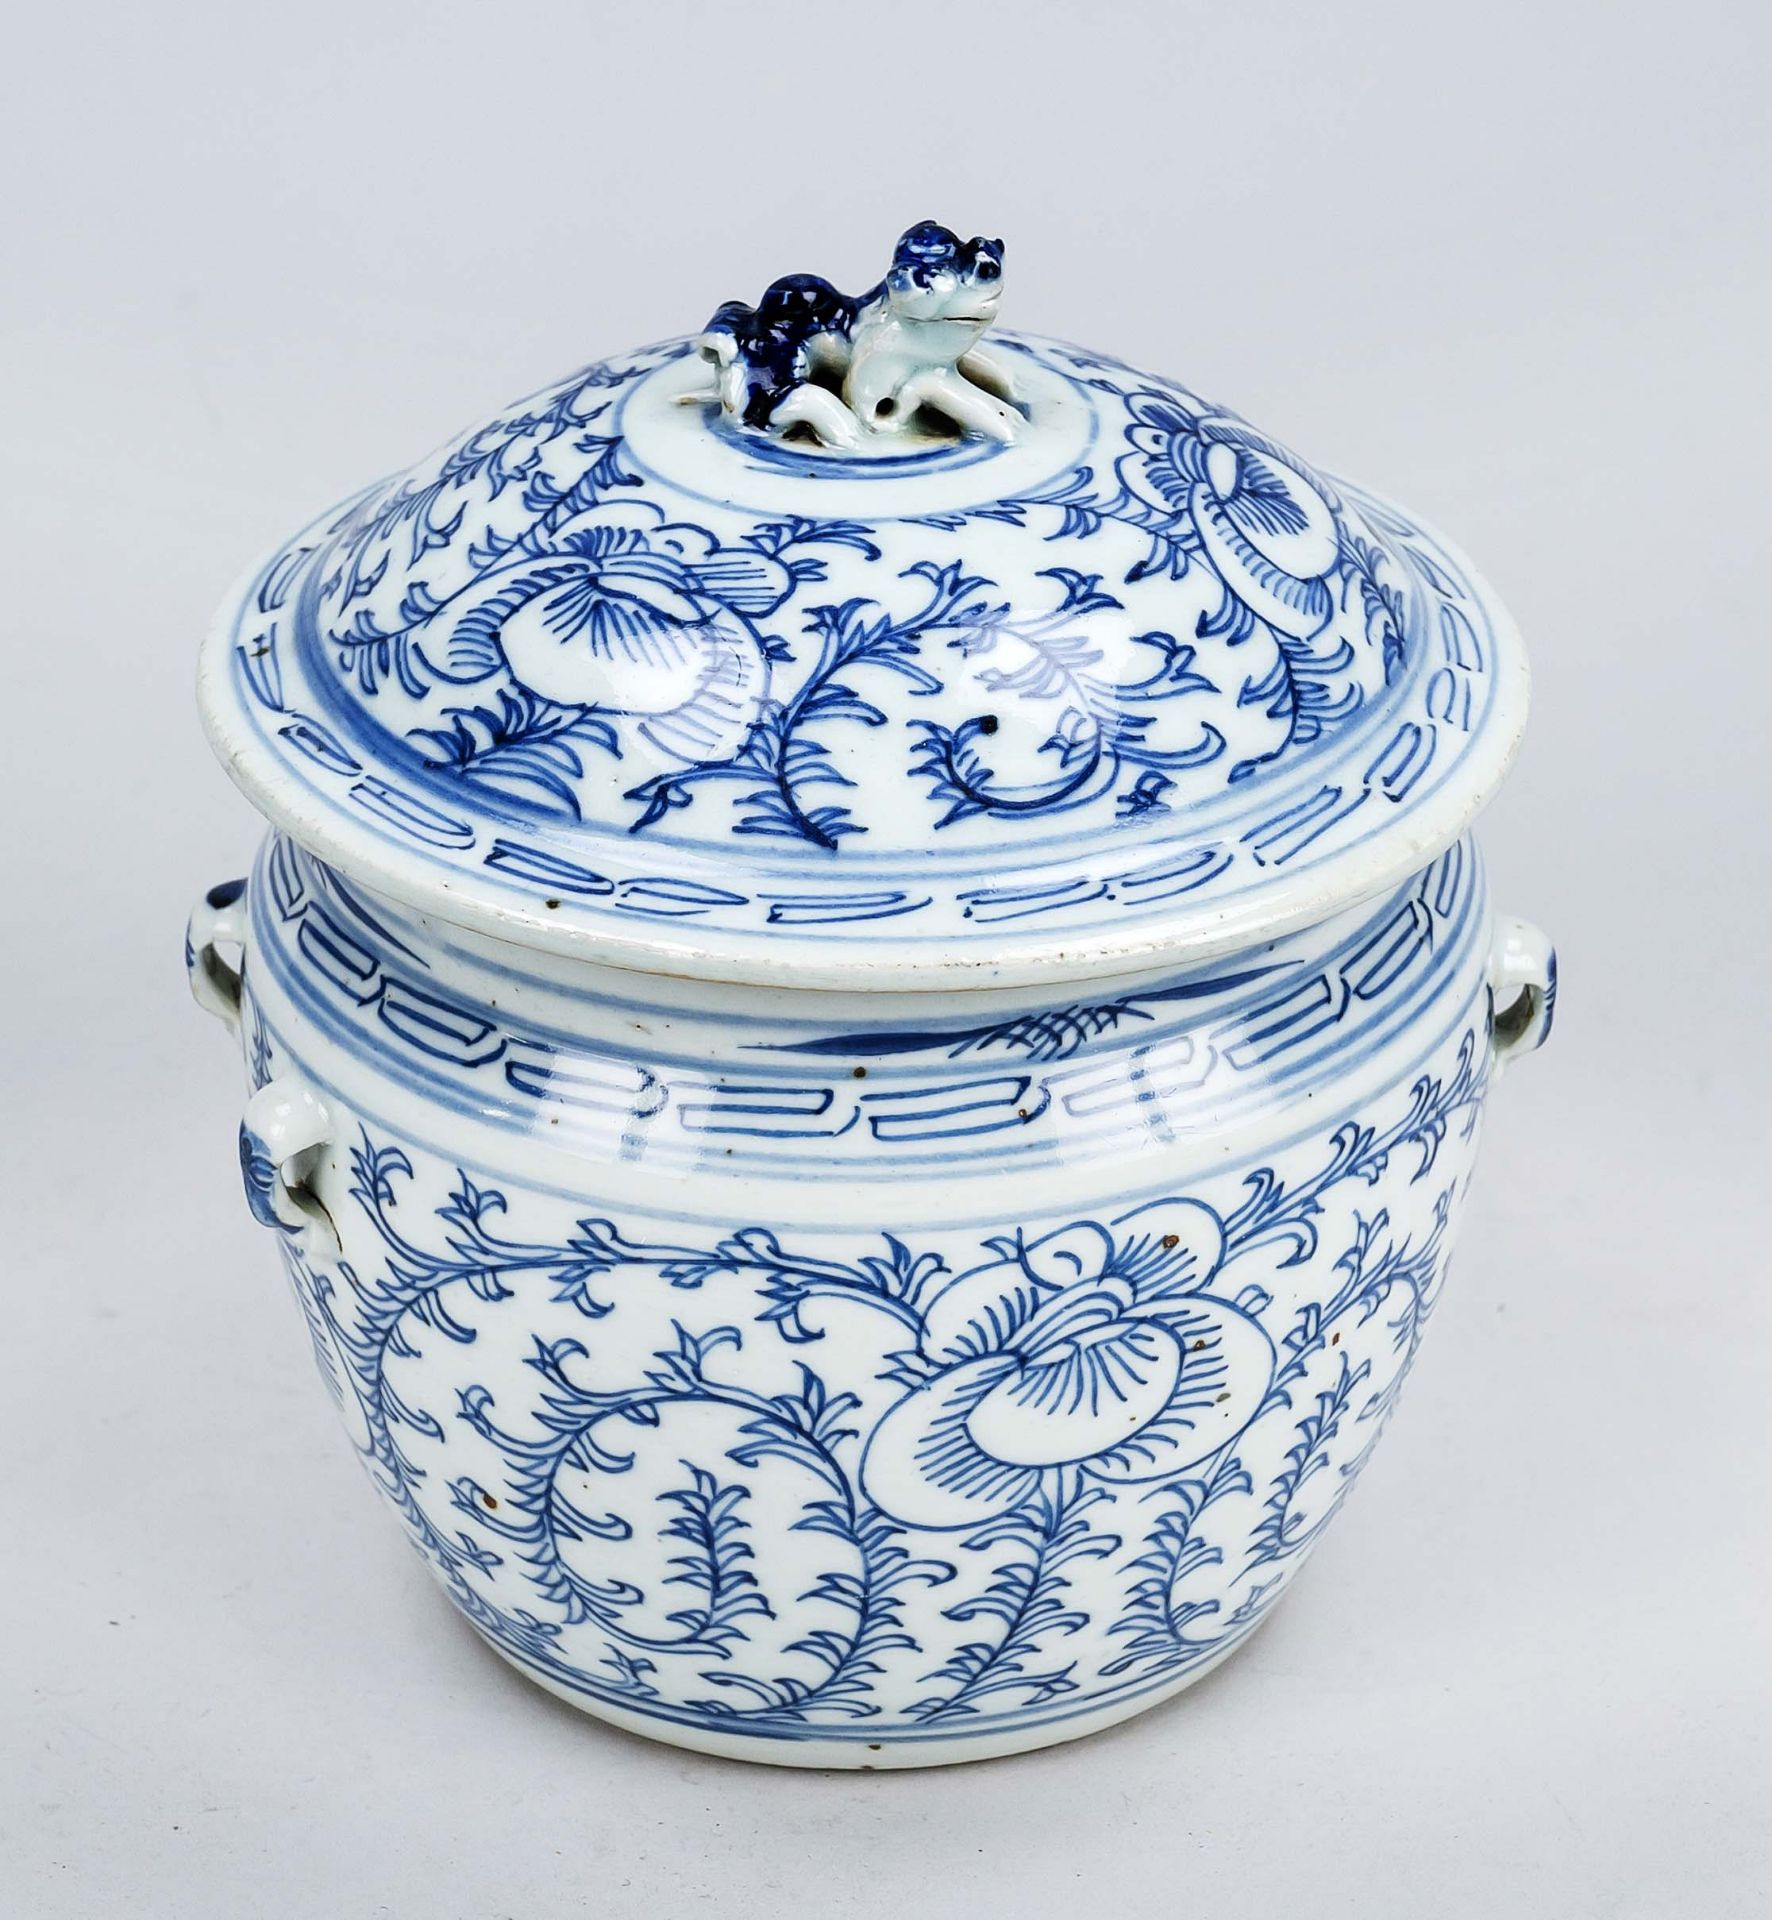 Lidded pot, China, 19th century, bobalt blue lotus tendril decoration, lid with figural knob (